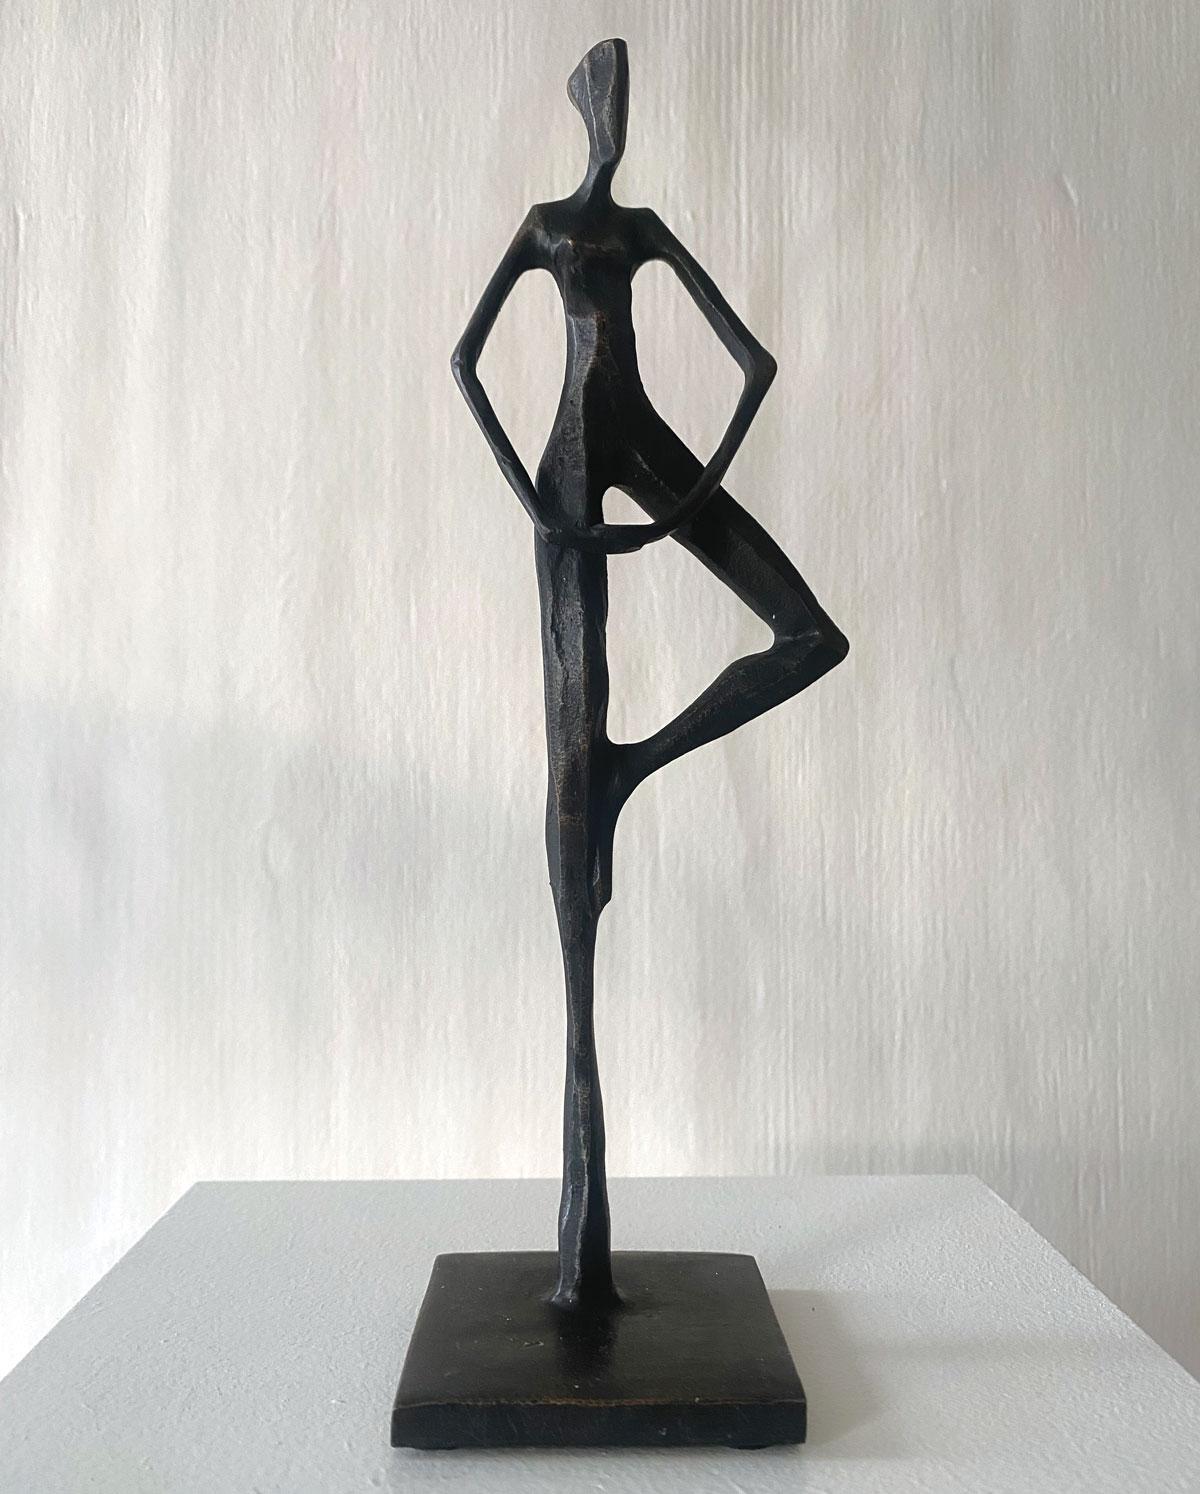 Swami II is an elegant figurative bronze sculpture by Nando Kallweit.

Modelled on modern youthful postures but with a nod to the importance of heritage through the stylised Egyptian-influenced head. A lovely piece on its own or with a group of